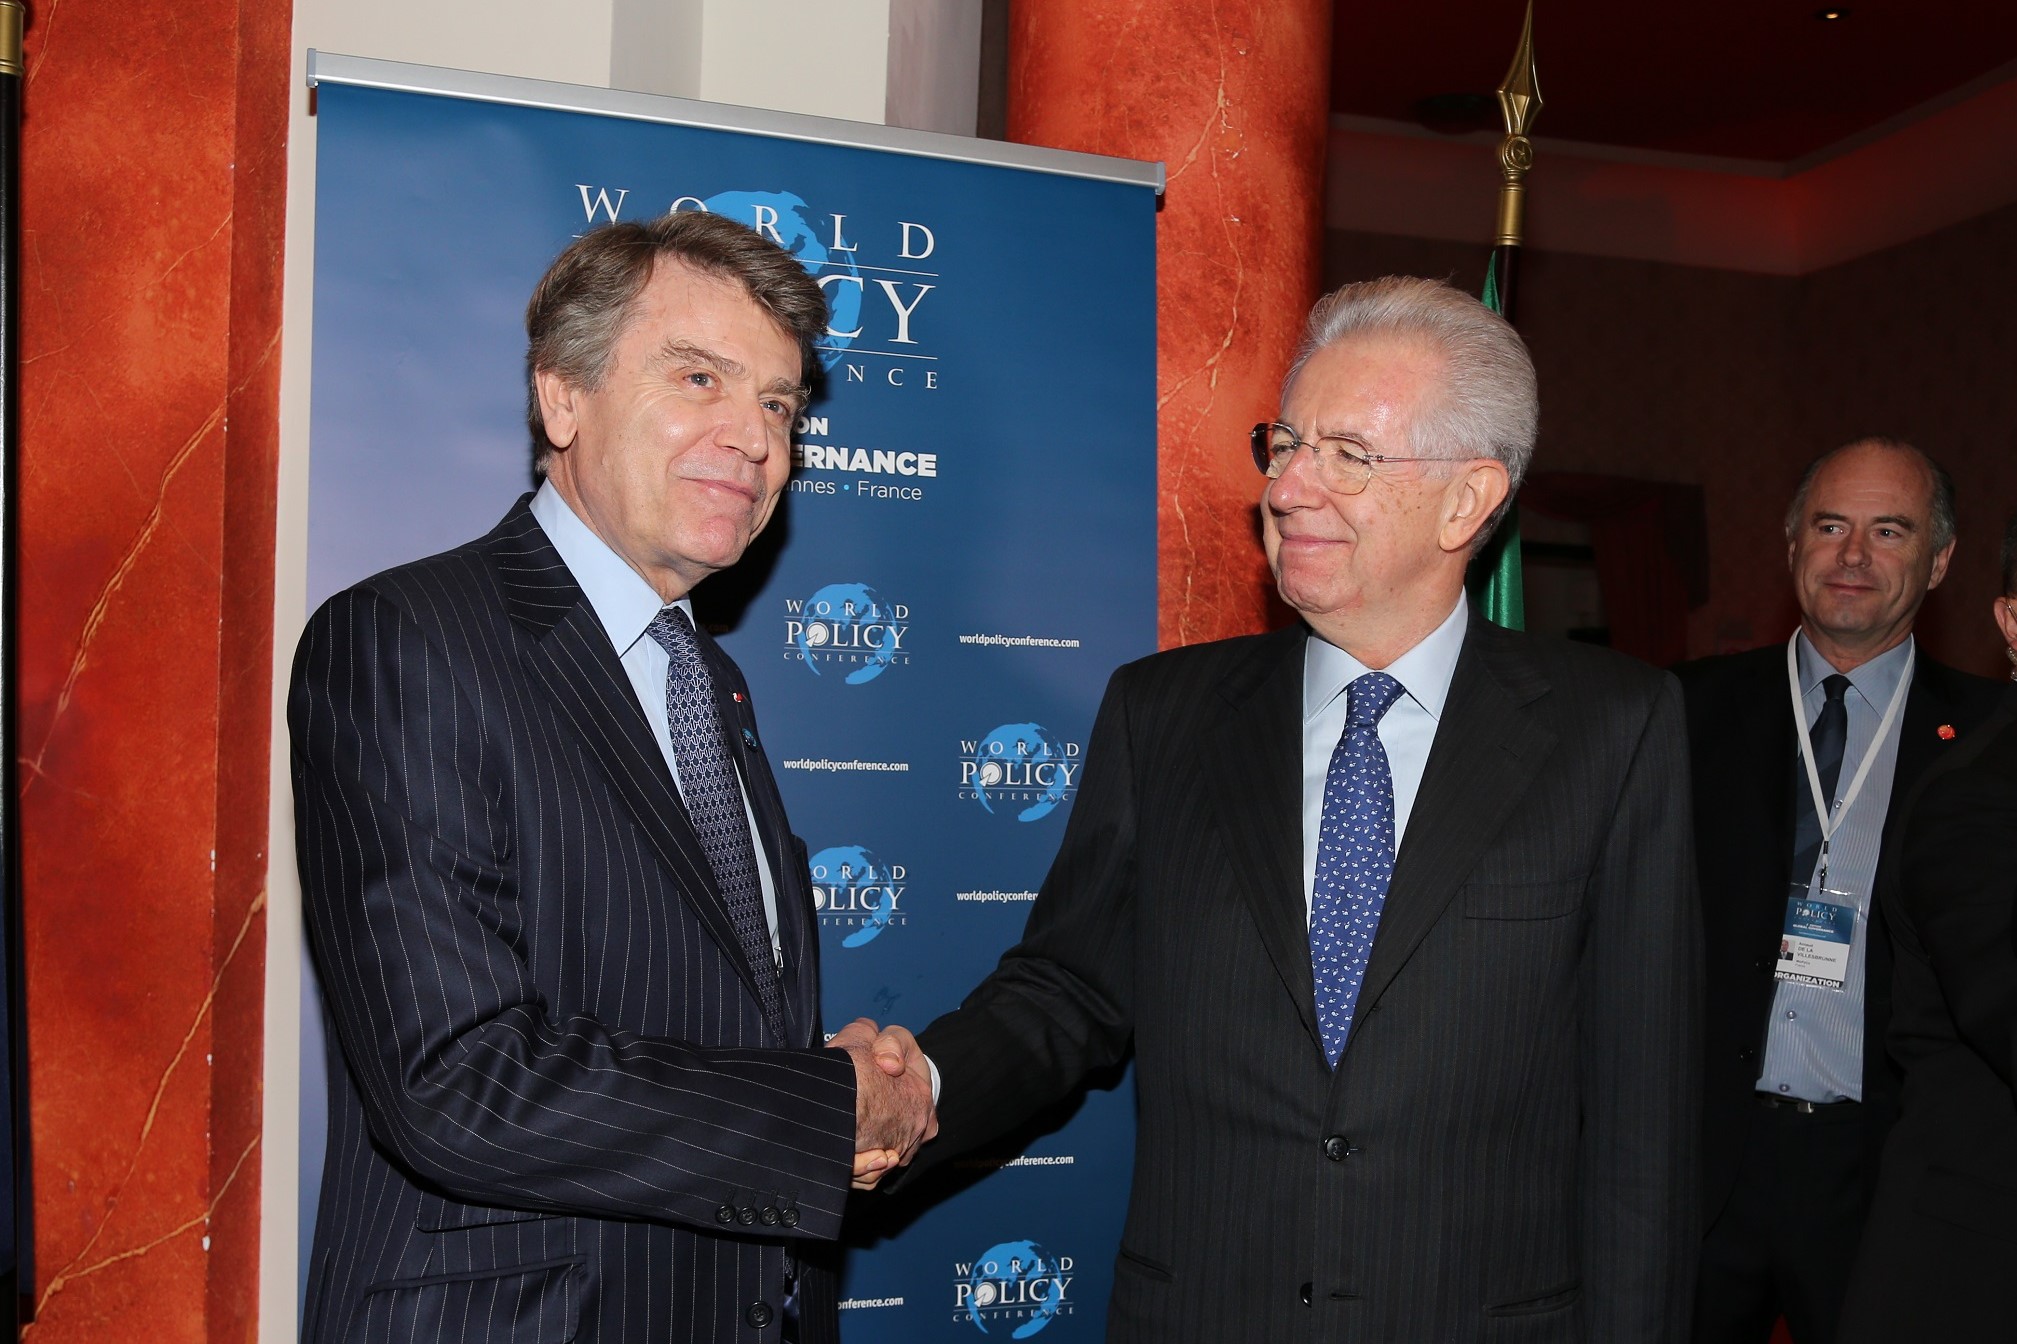 World Policy Conference WPC 2012, Thierry de Montbrial, Mario Monti